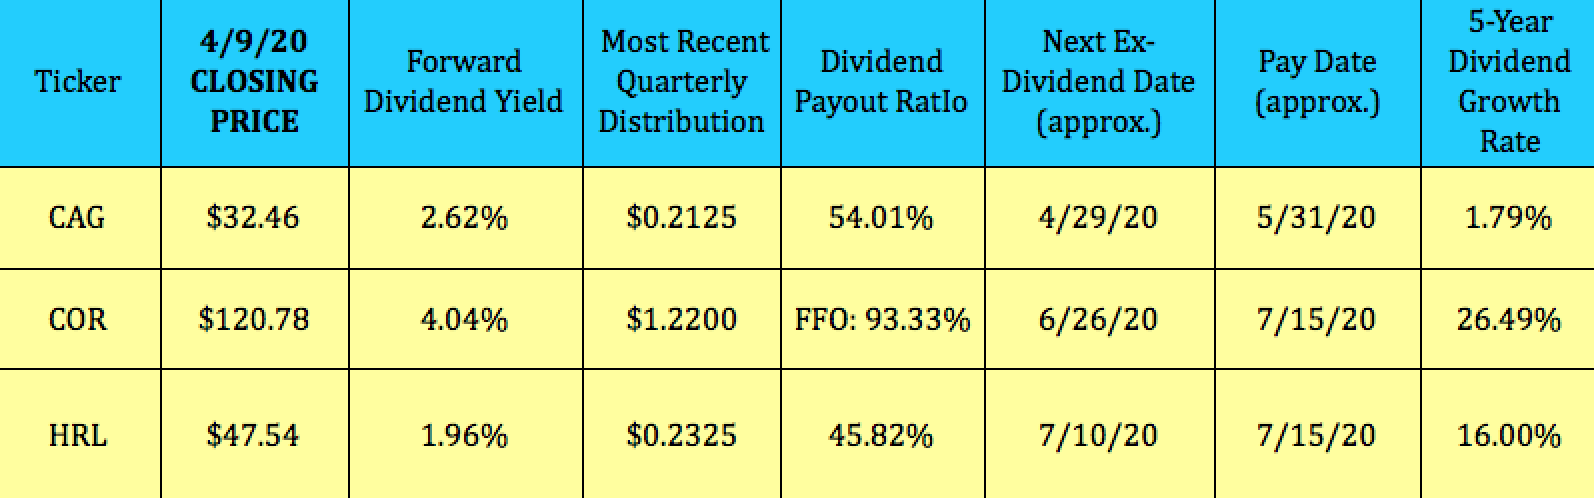 CAG-Dividend Yield